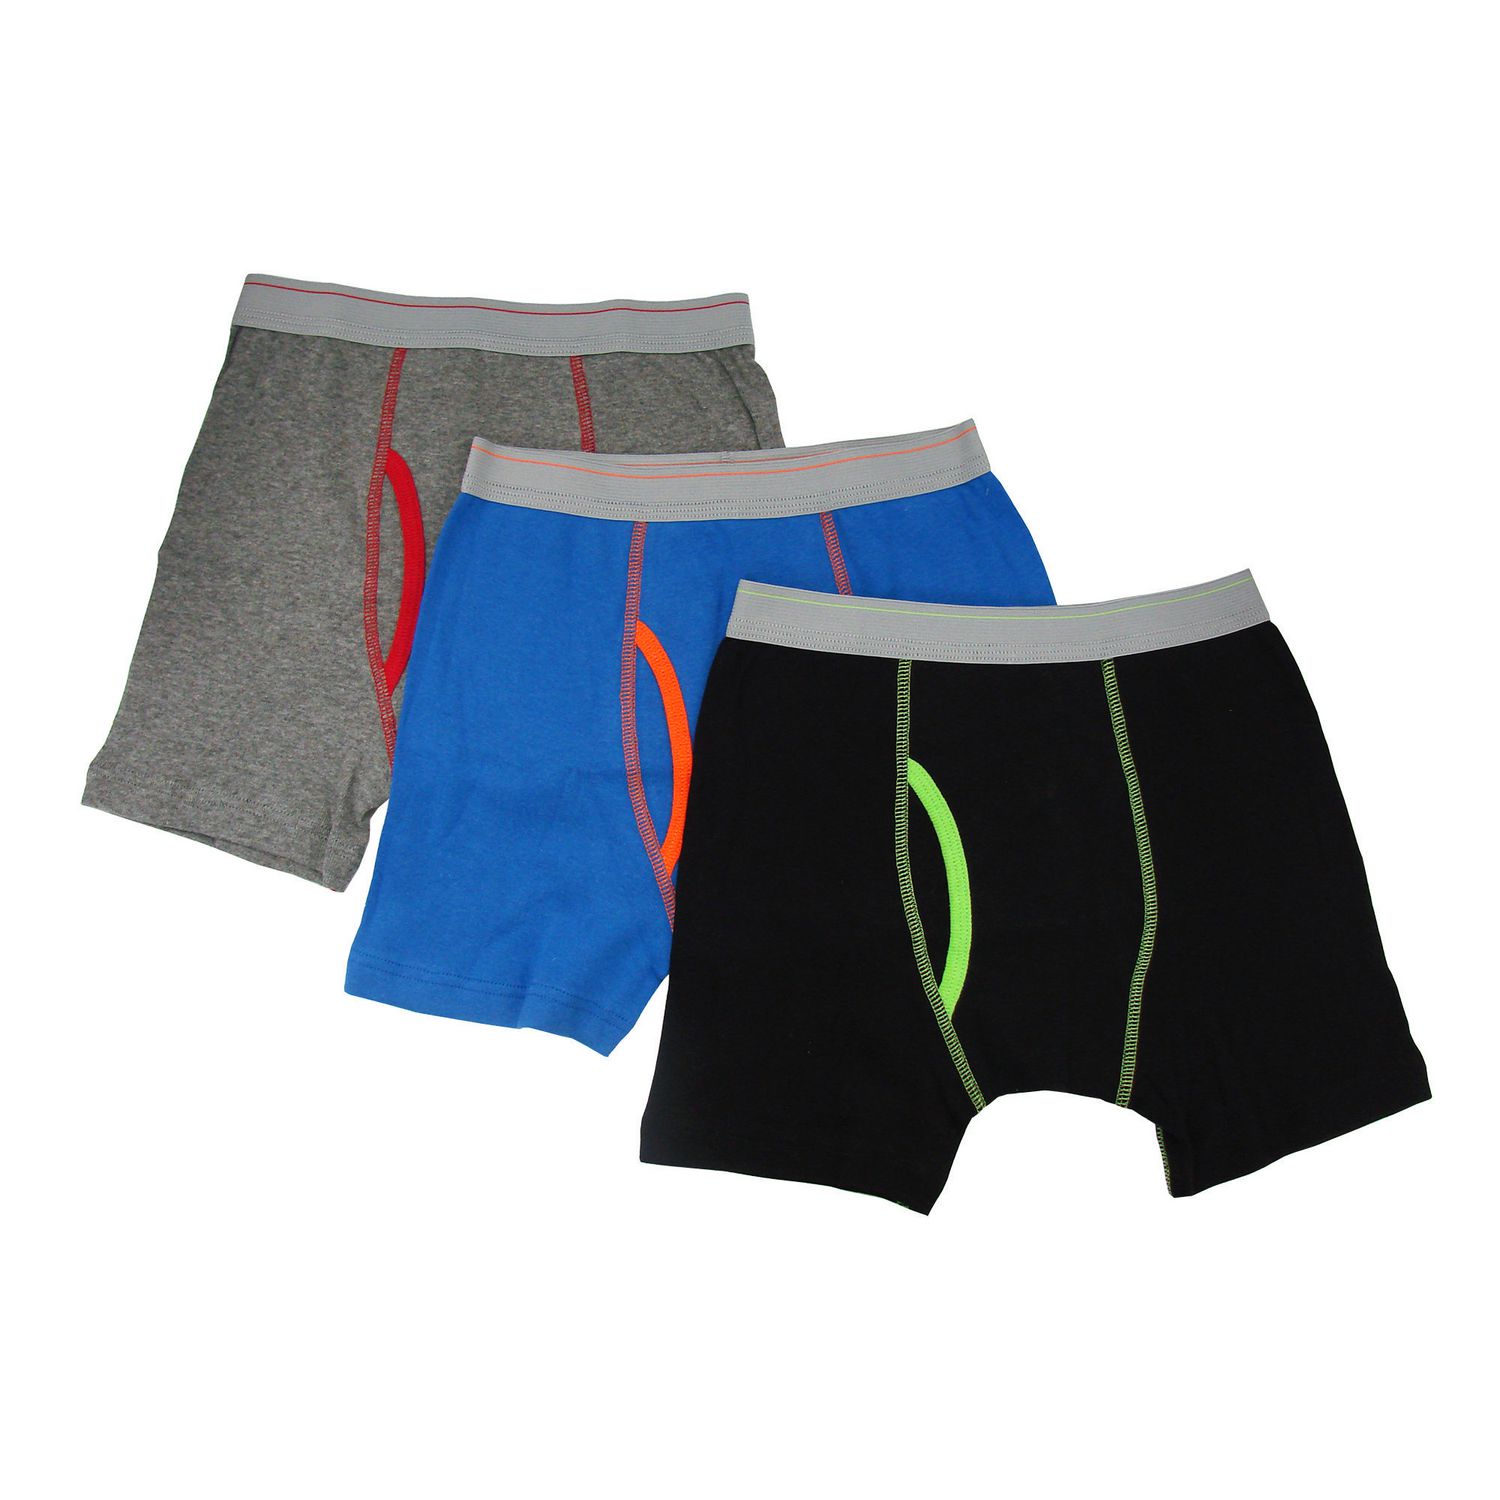 Fruit of the Loom Toddler Boys 5-Pack Boxer Brief, Sizes 2T/3T, 4T/5T